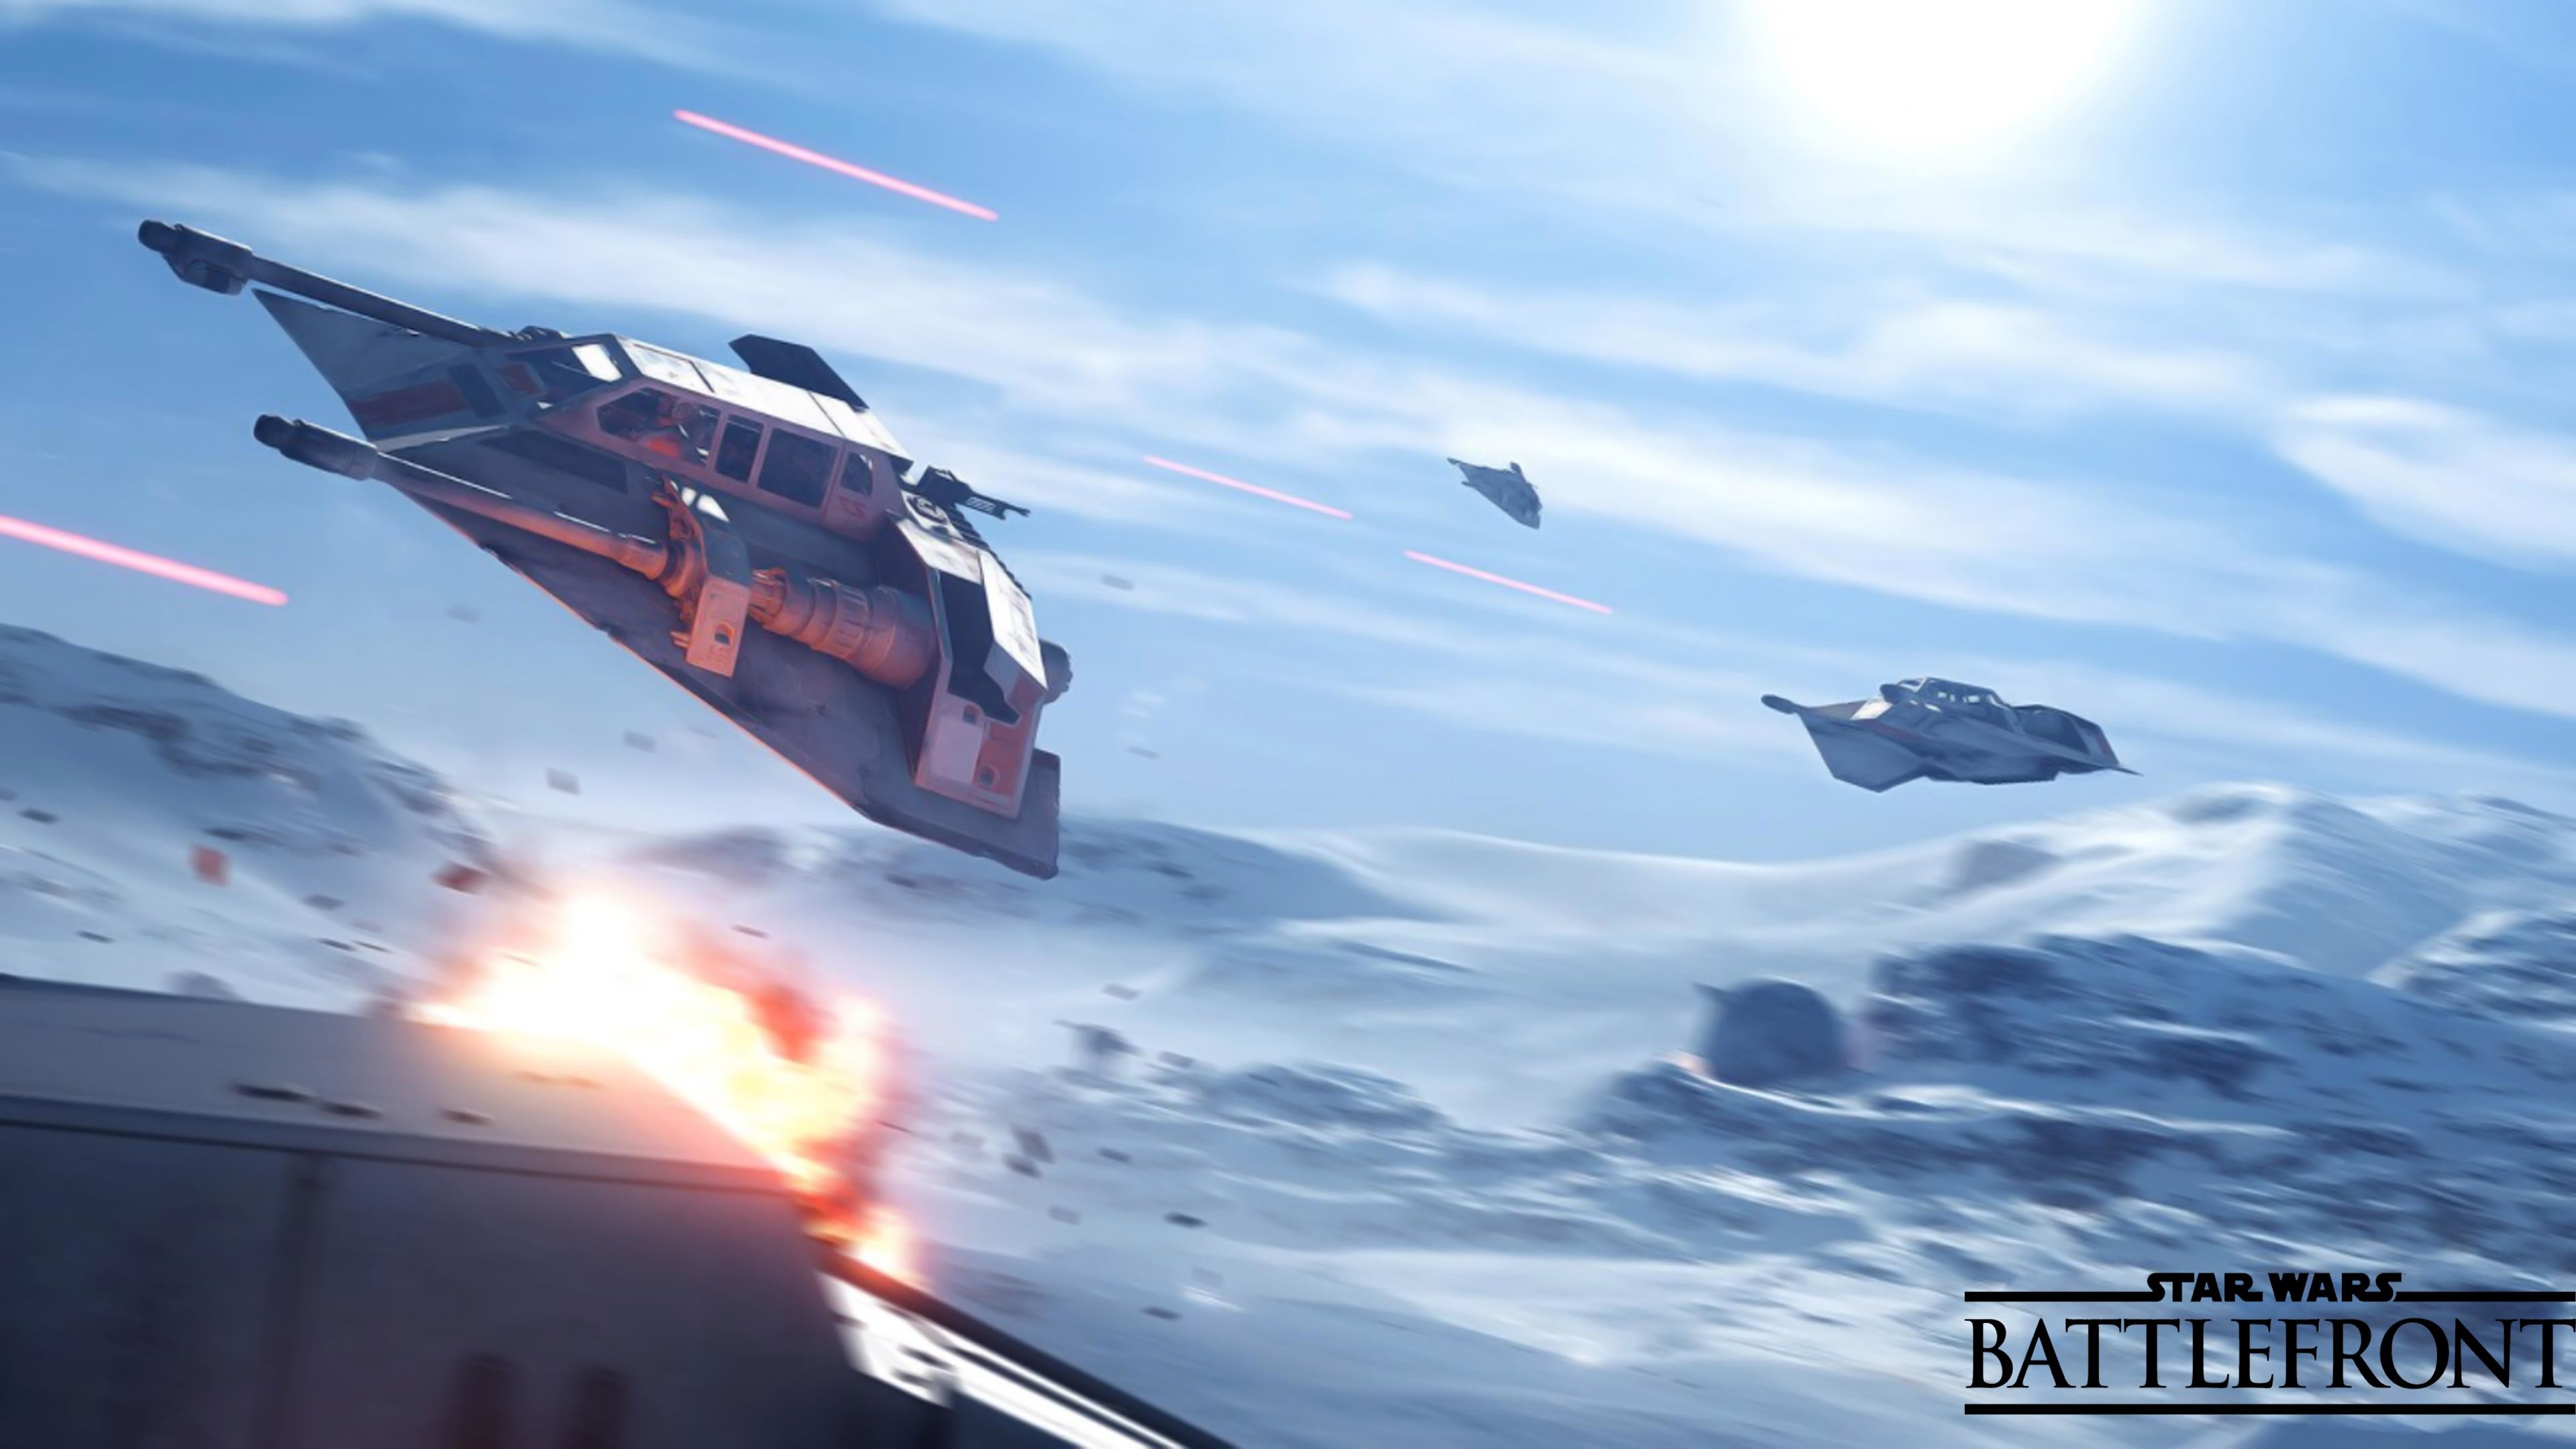 3840x2160 I made another 4K Star Wars Battlefront wallpaper for you guys!